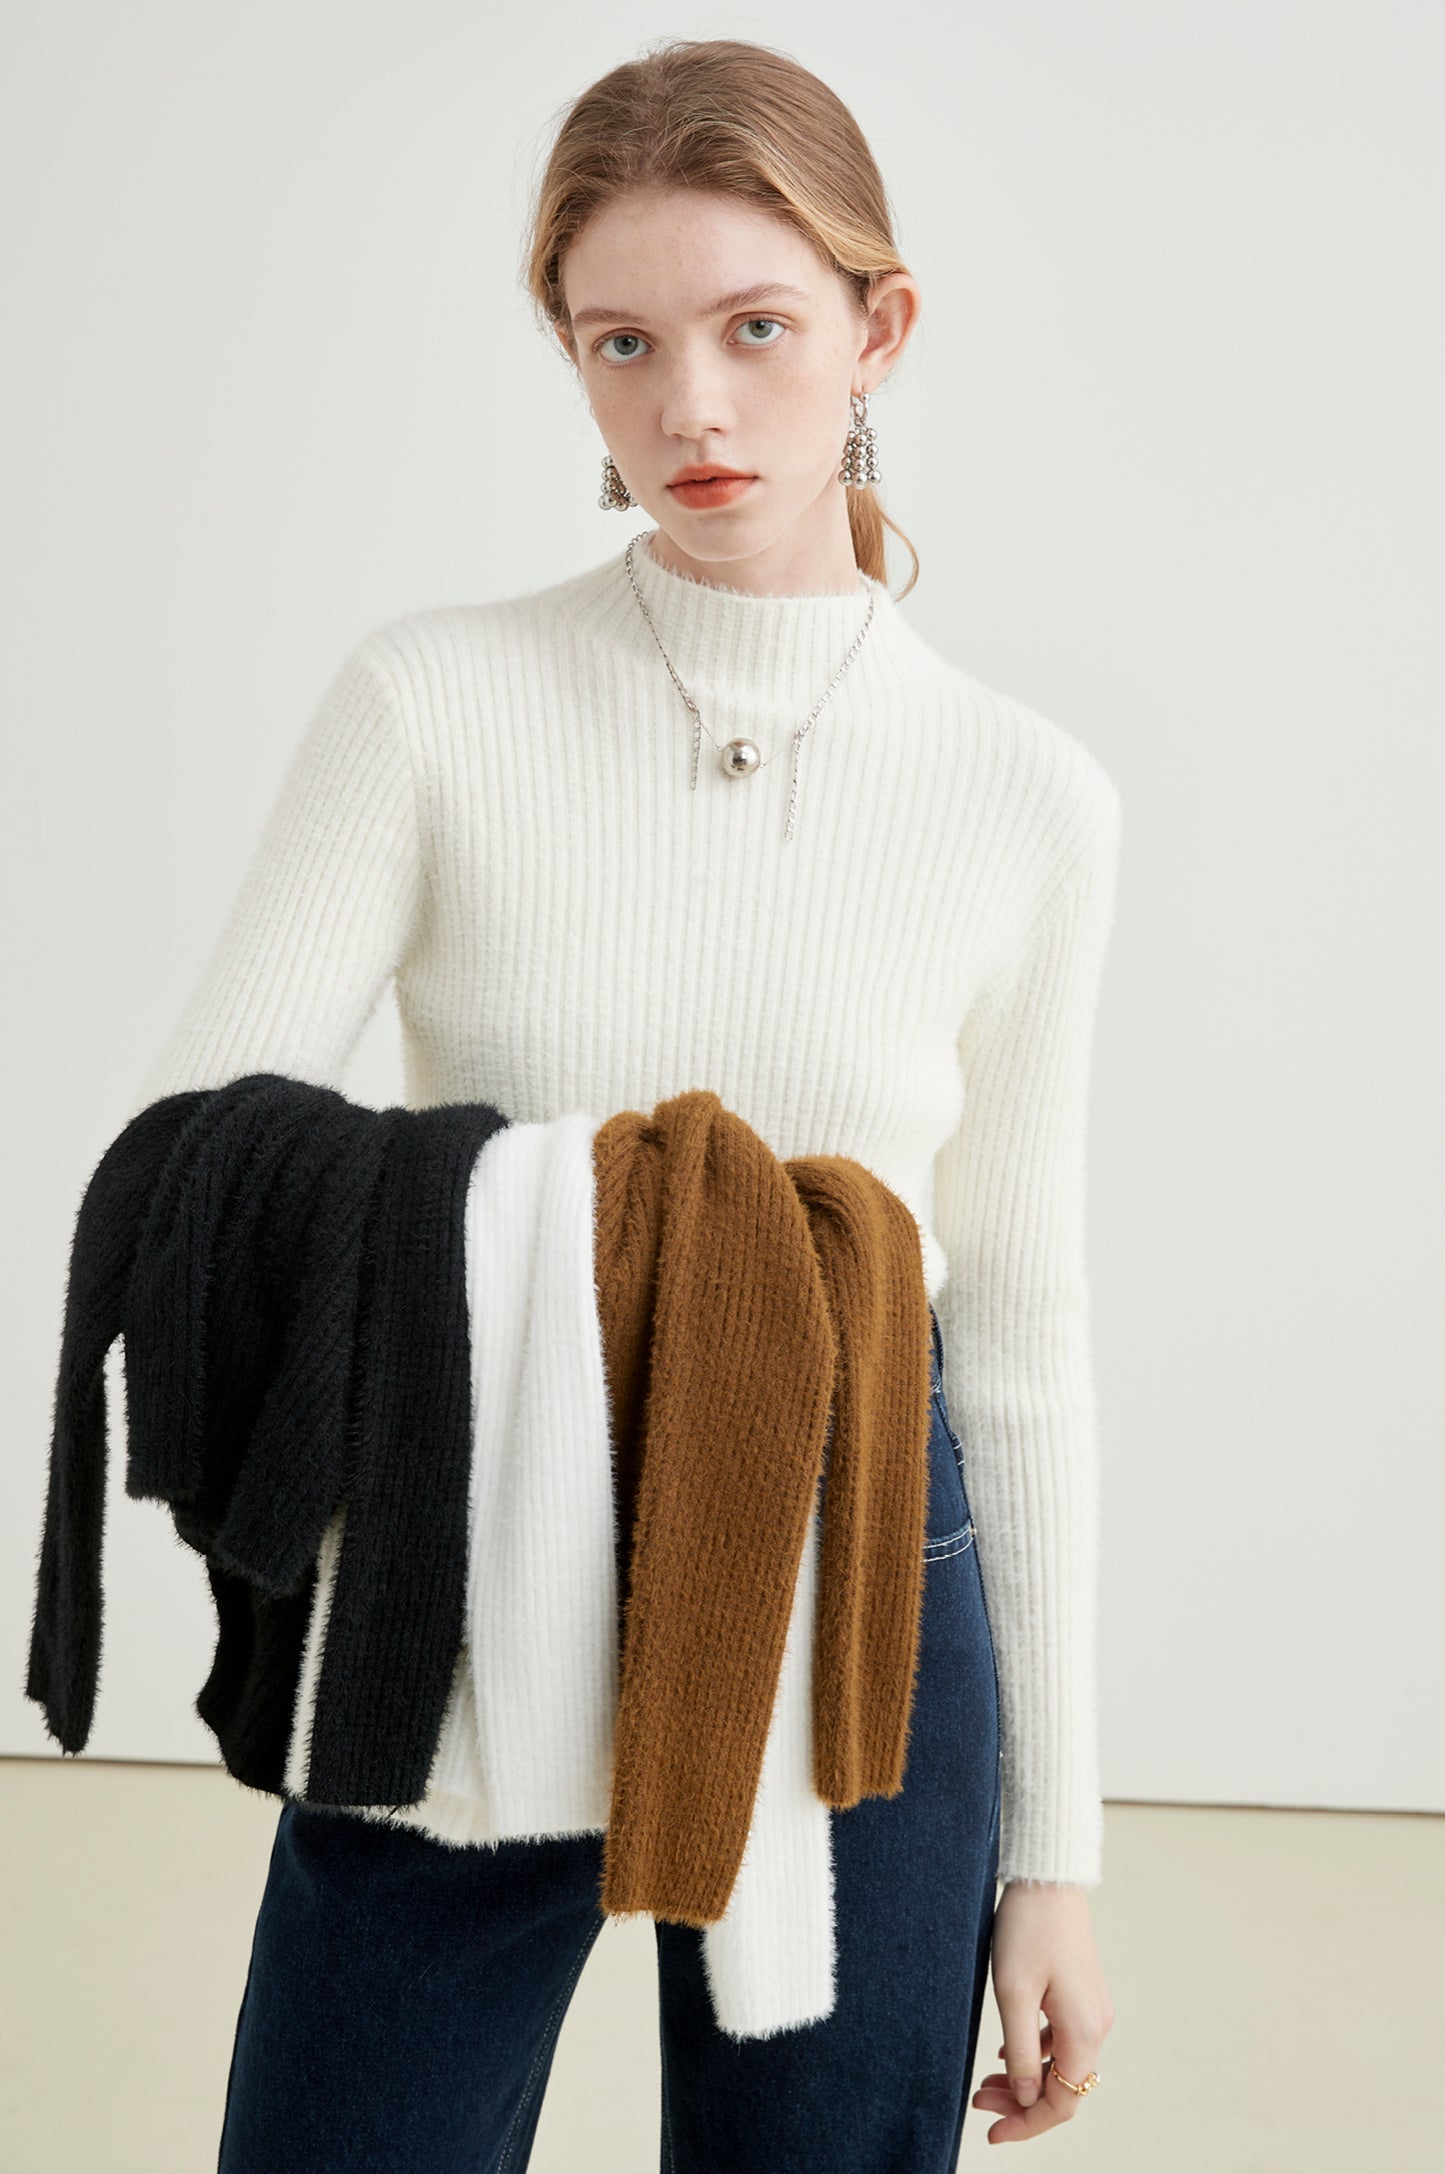 highneck,knit,sweater,black,white,brown,simple,cute,cool,sexy,modern